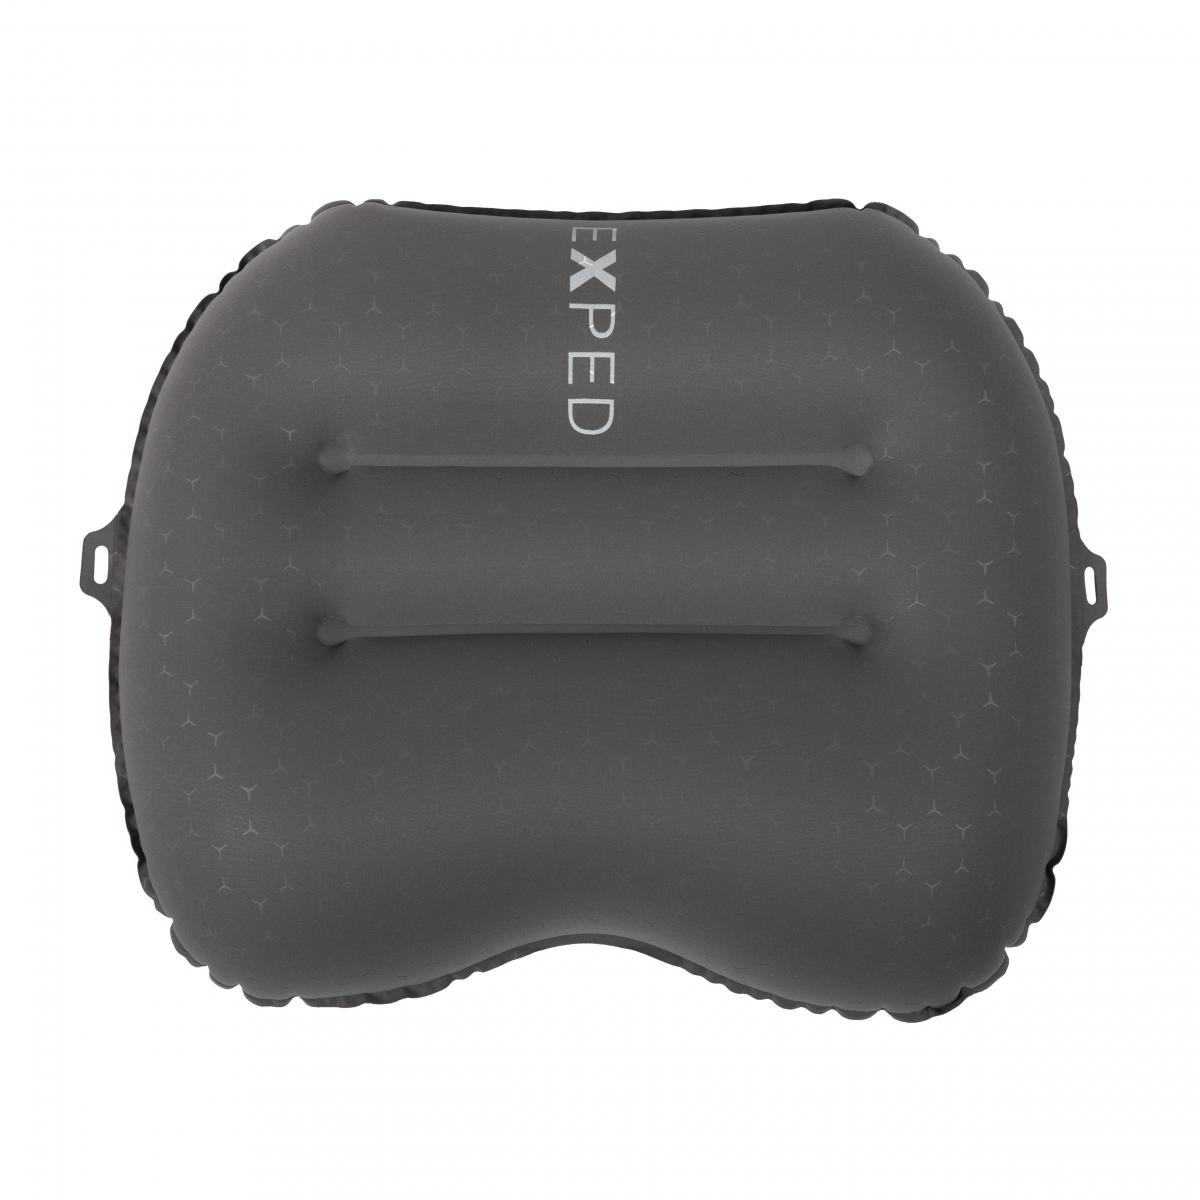 Exped  Ultra Pillow M greygoose